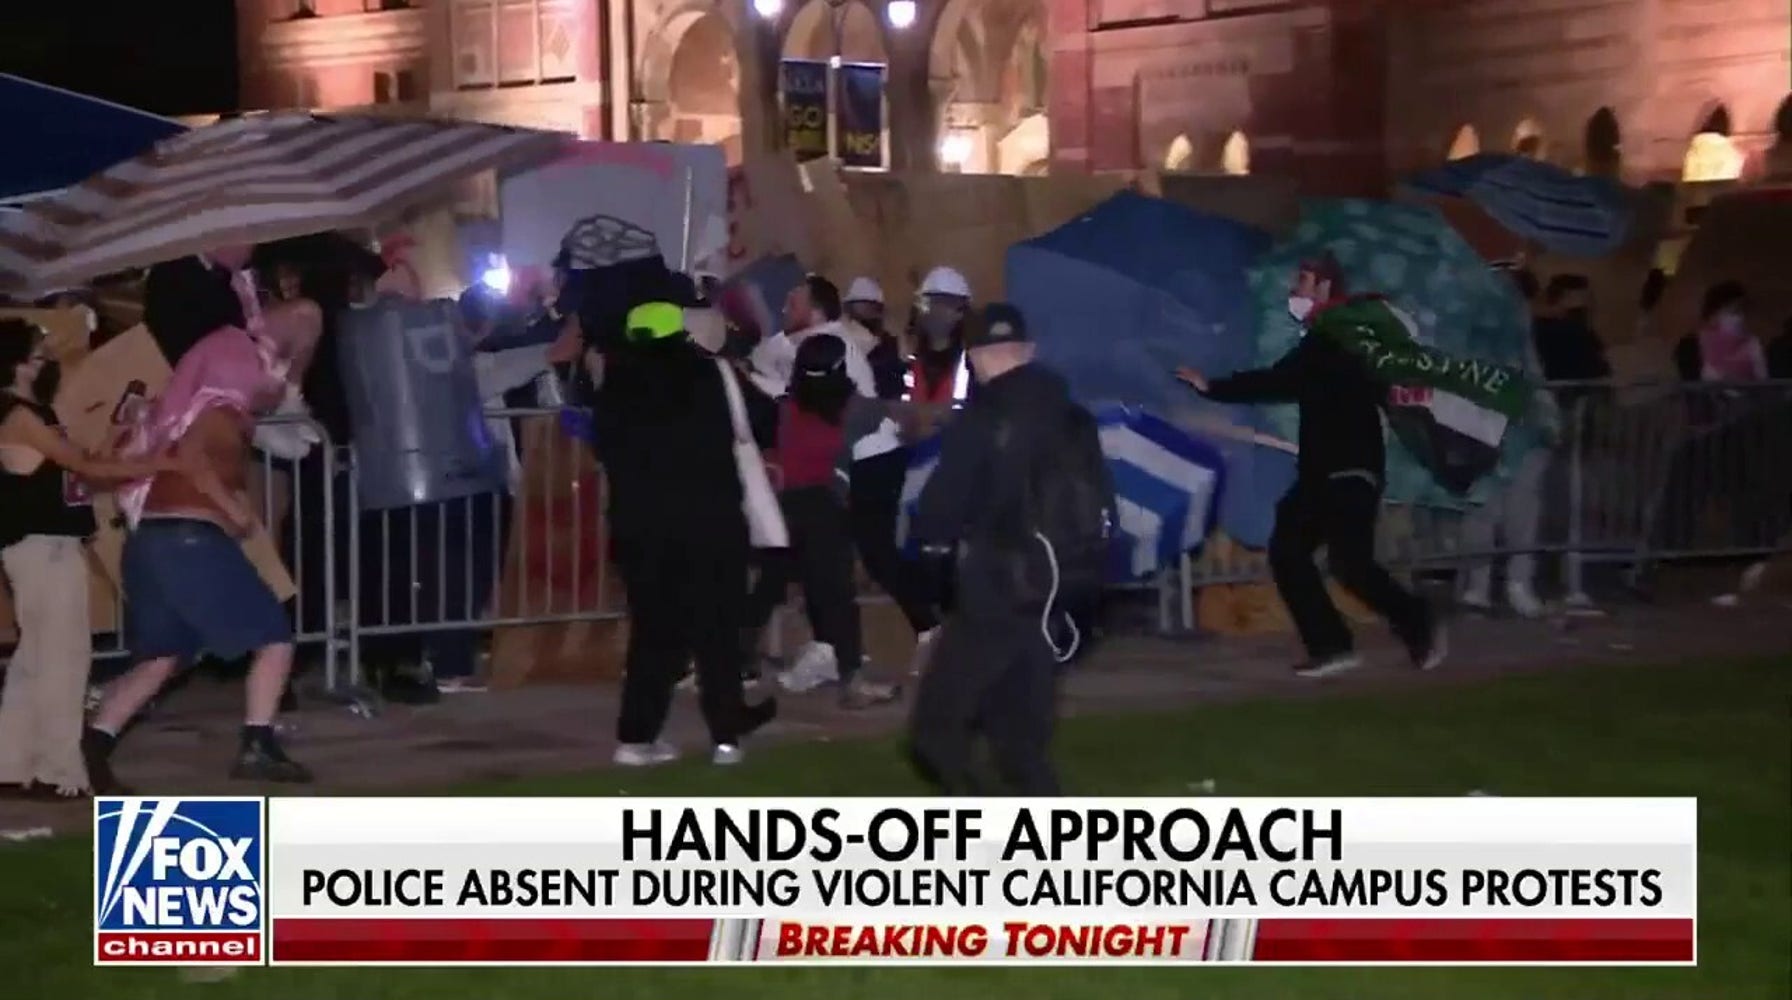 UCLA Chancellor Condemns Violent Protests, YAF Accuses School of Prioritizing Anti-Israel Extremists